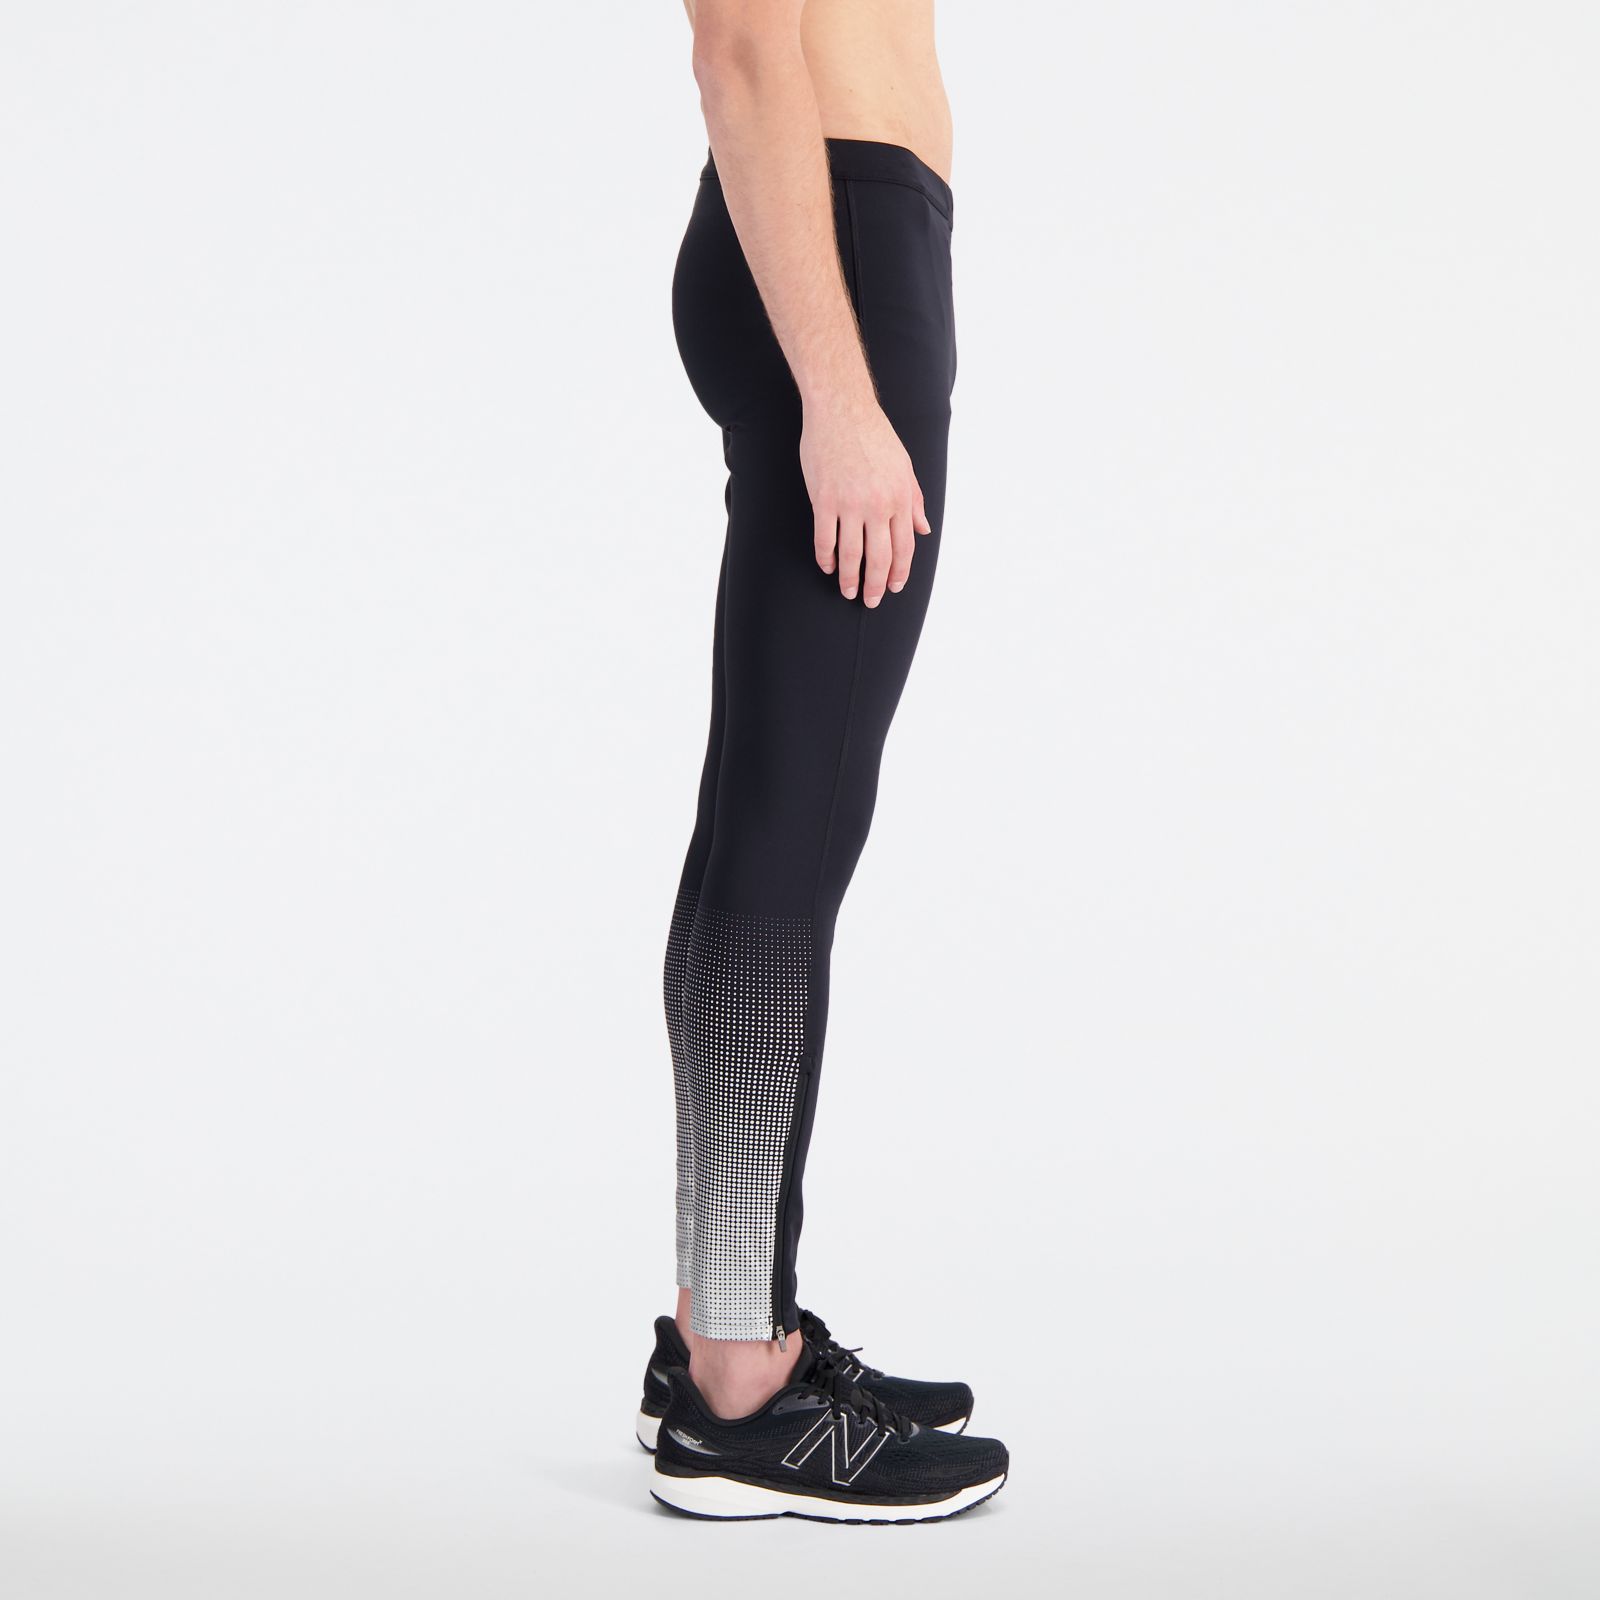 Buy New Balance Accelerate Leggings (MP23234) black from £30.99 (Today) –  Best Deals on